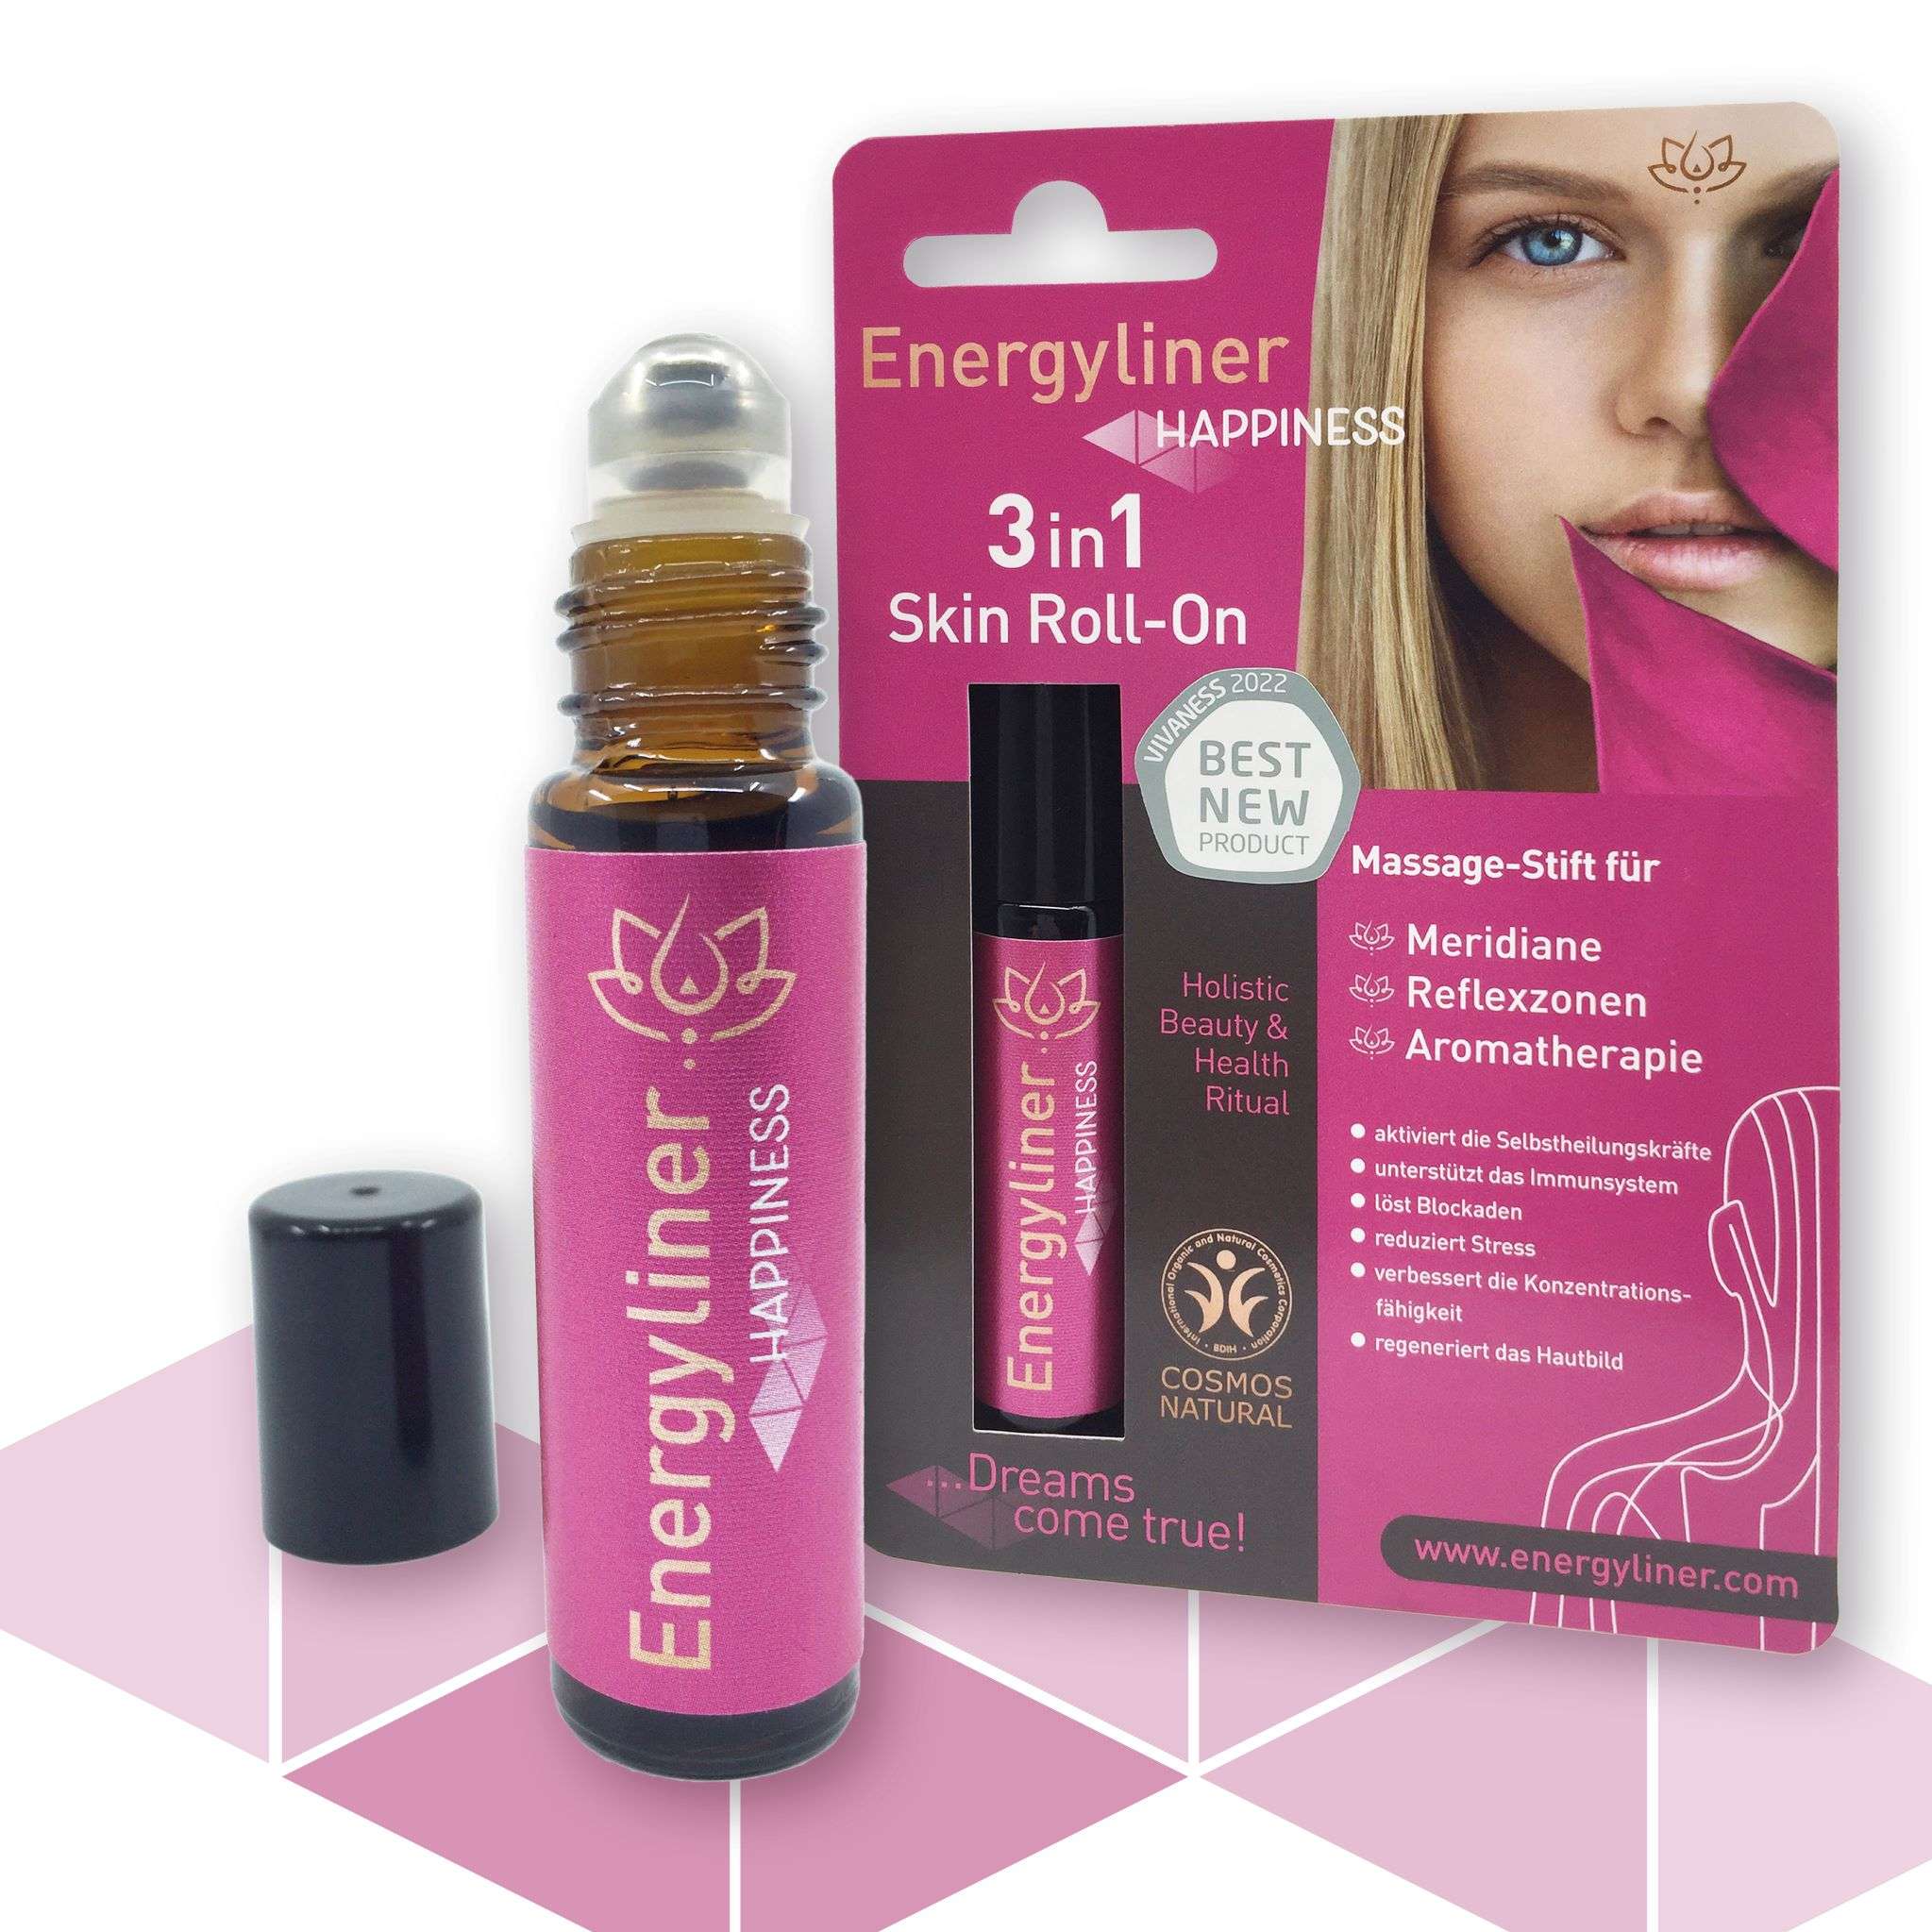 Energyliner Happiness / 3 in 1 Skin Roll-On / 10ml